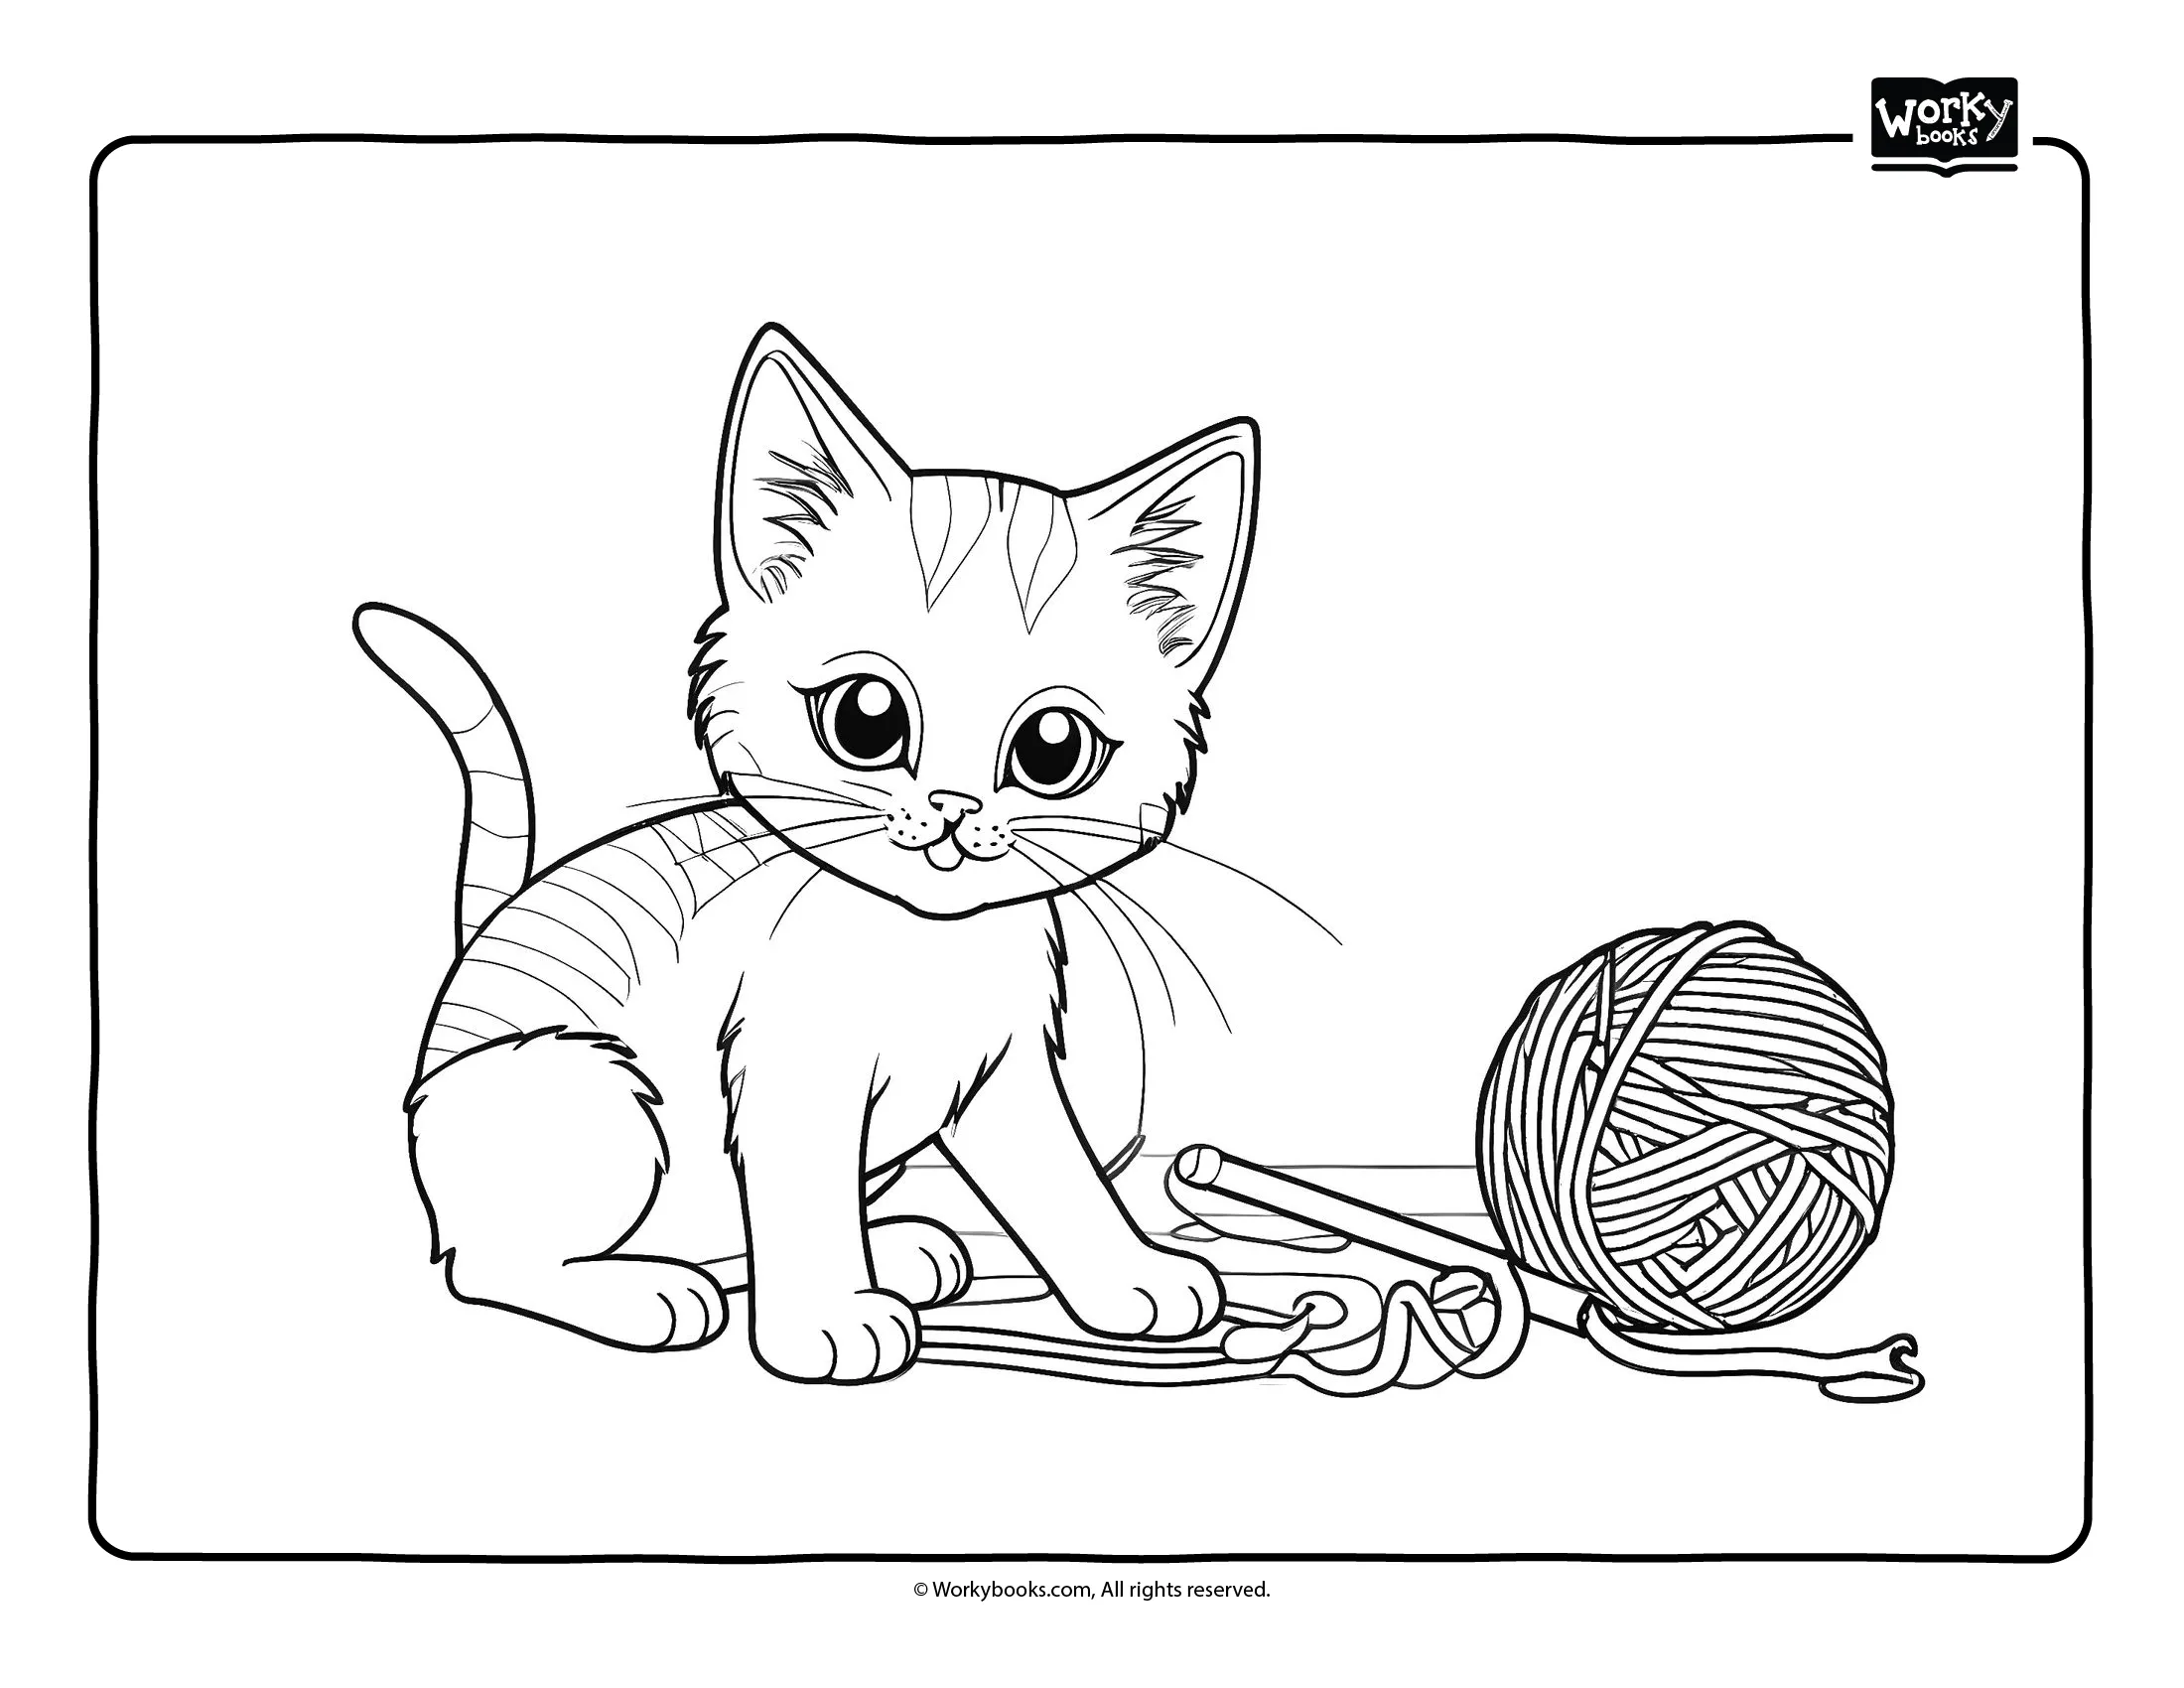 Cat playing with yarn coloring sheet
